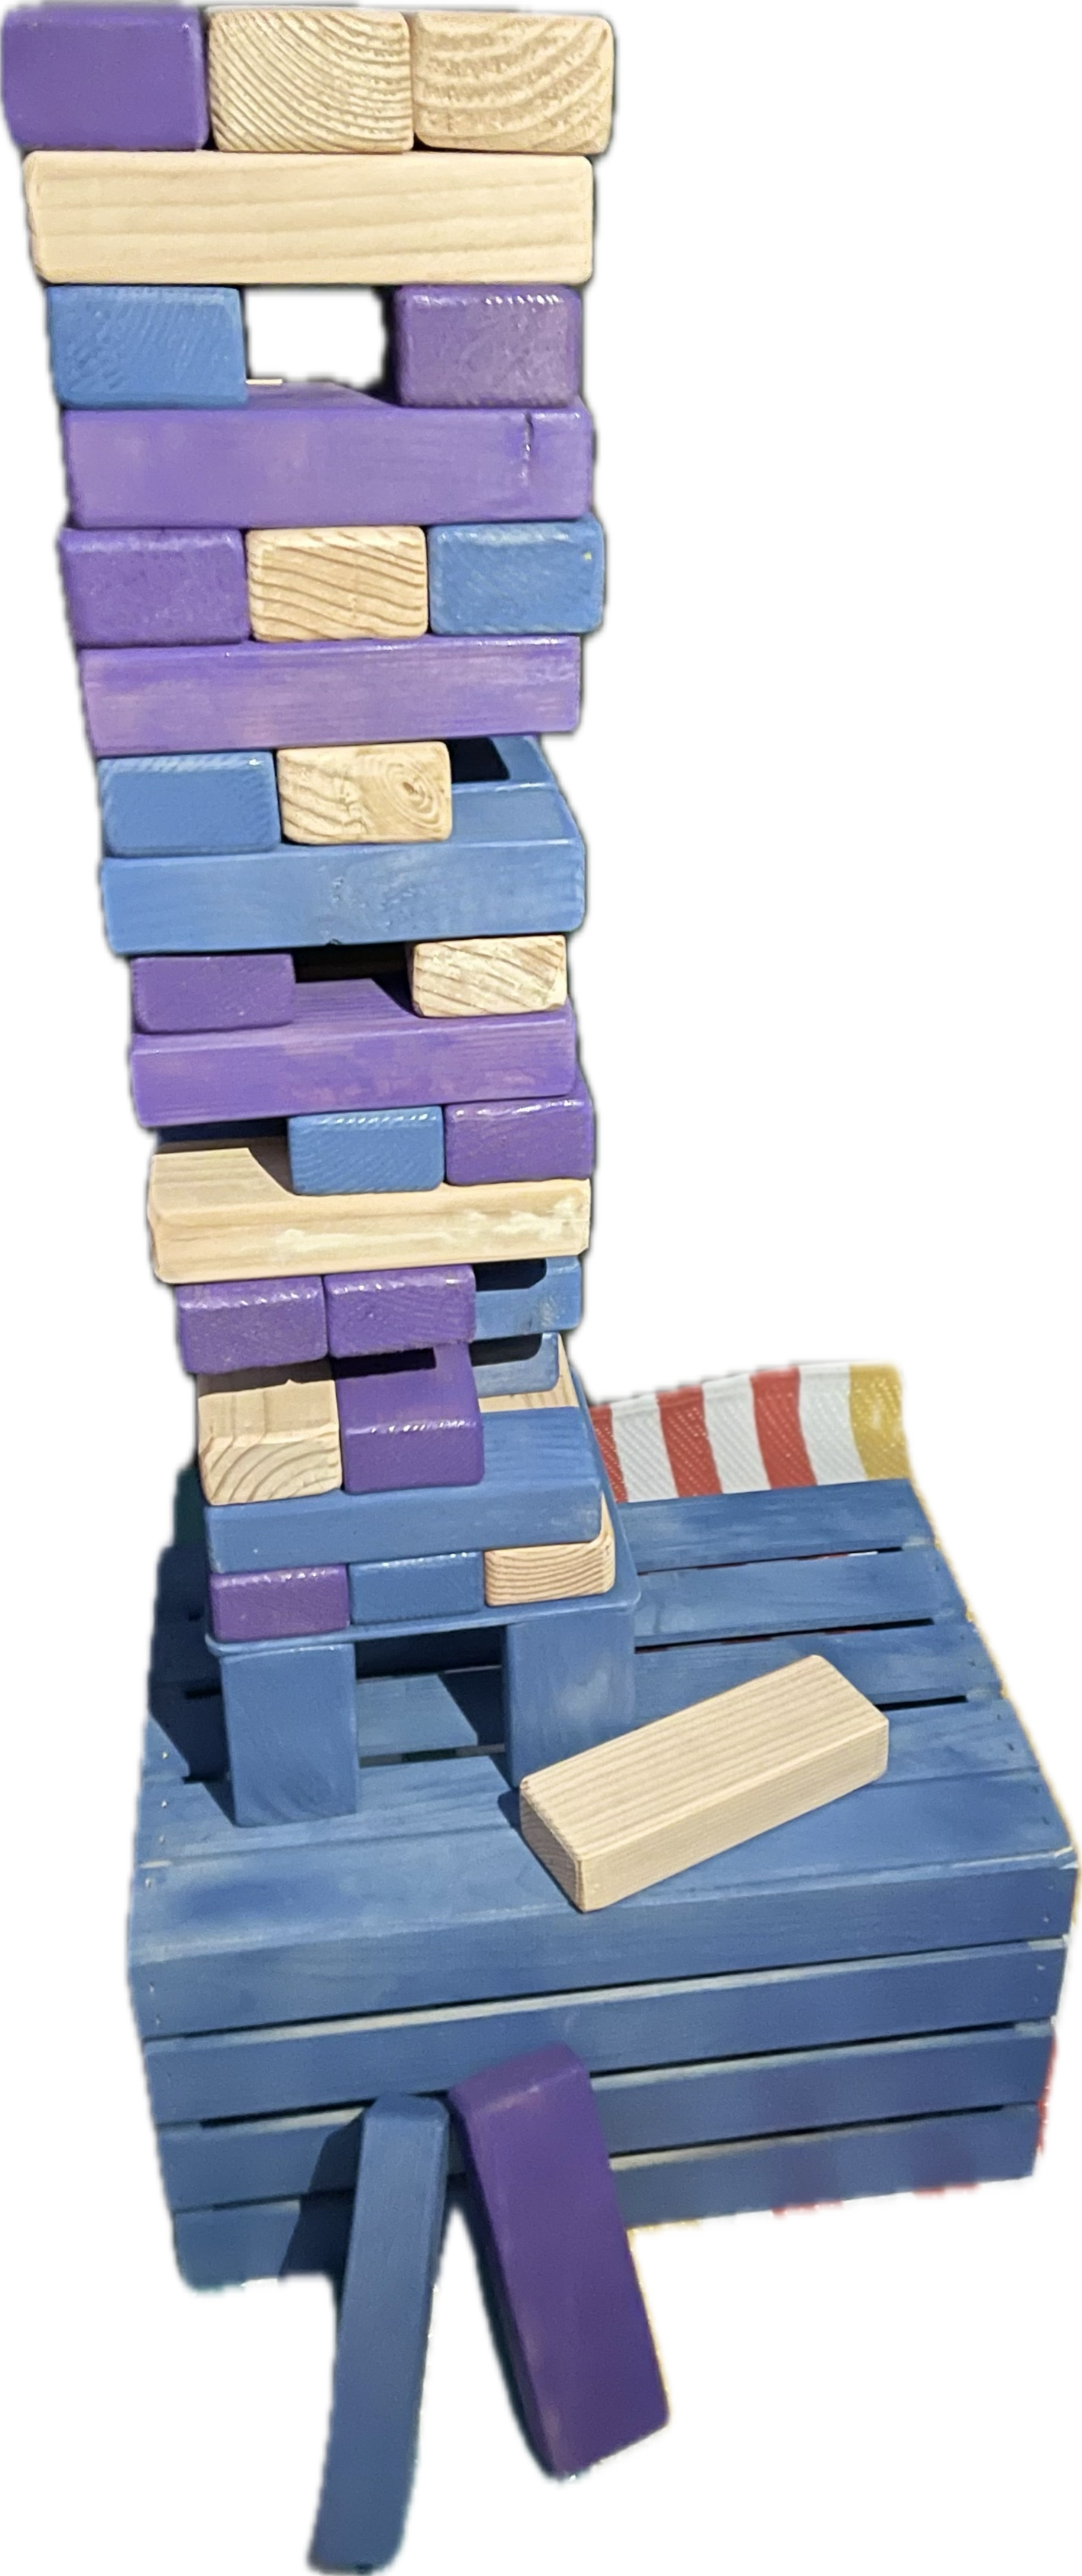 GIANT Tumble TOWER GAME STAINED in 2 Colors + CRATE & STAND